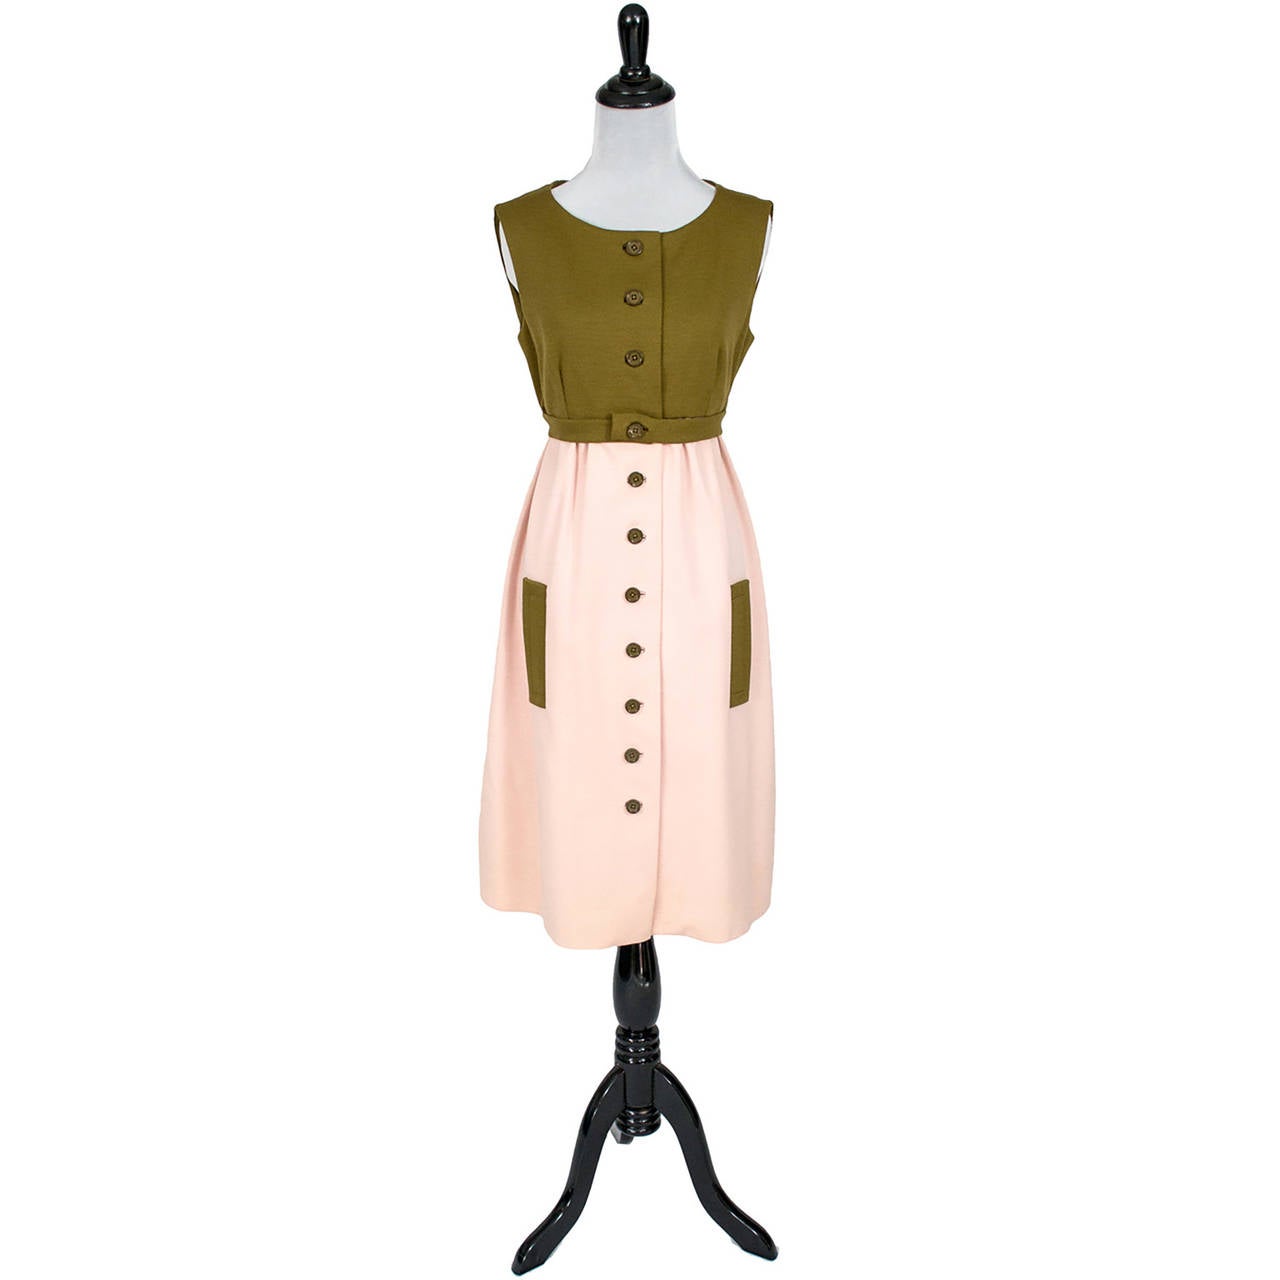 This is a classic 1960s Collectible vintage dress from designer Jacques Tiffeau in a pink and olive green / brown 100% wool knit.  This sleeveless dress has an empire waist and buttons up the front. The dress is in excellent condition and comes with